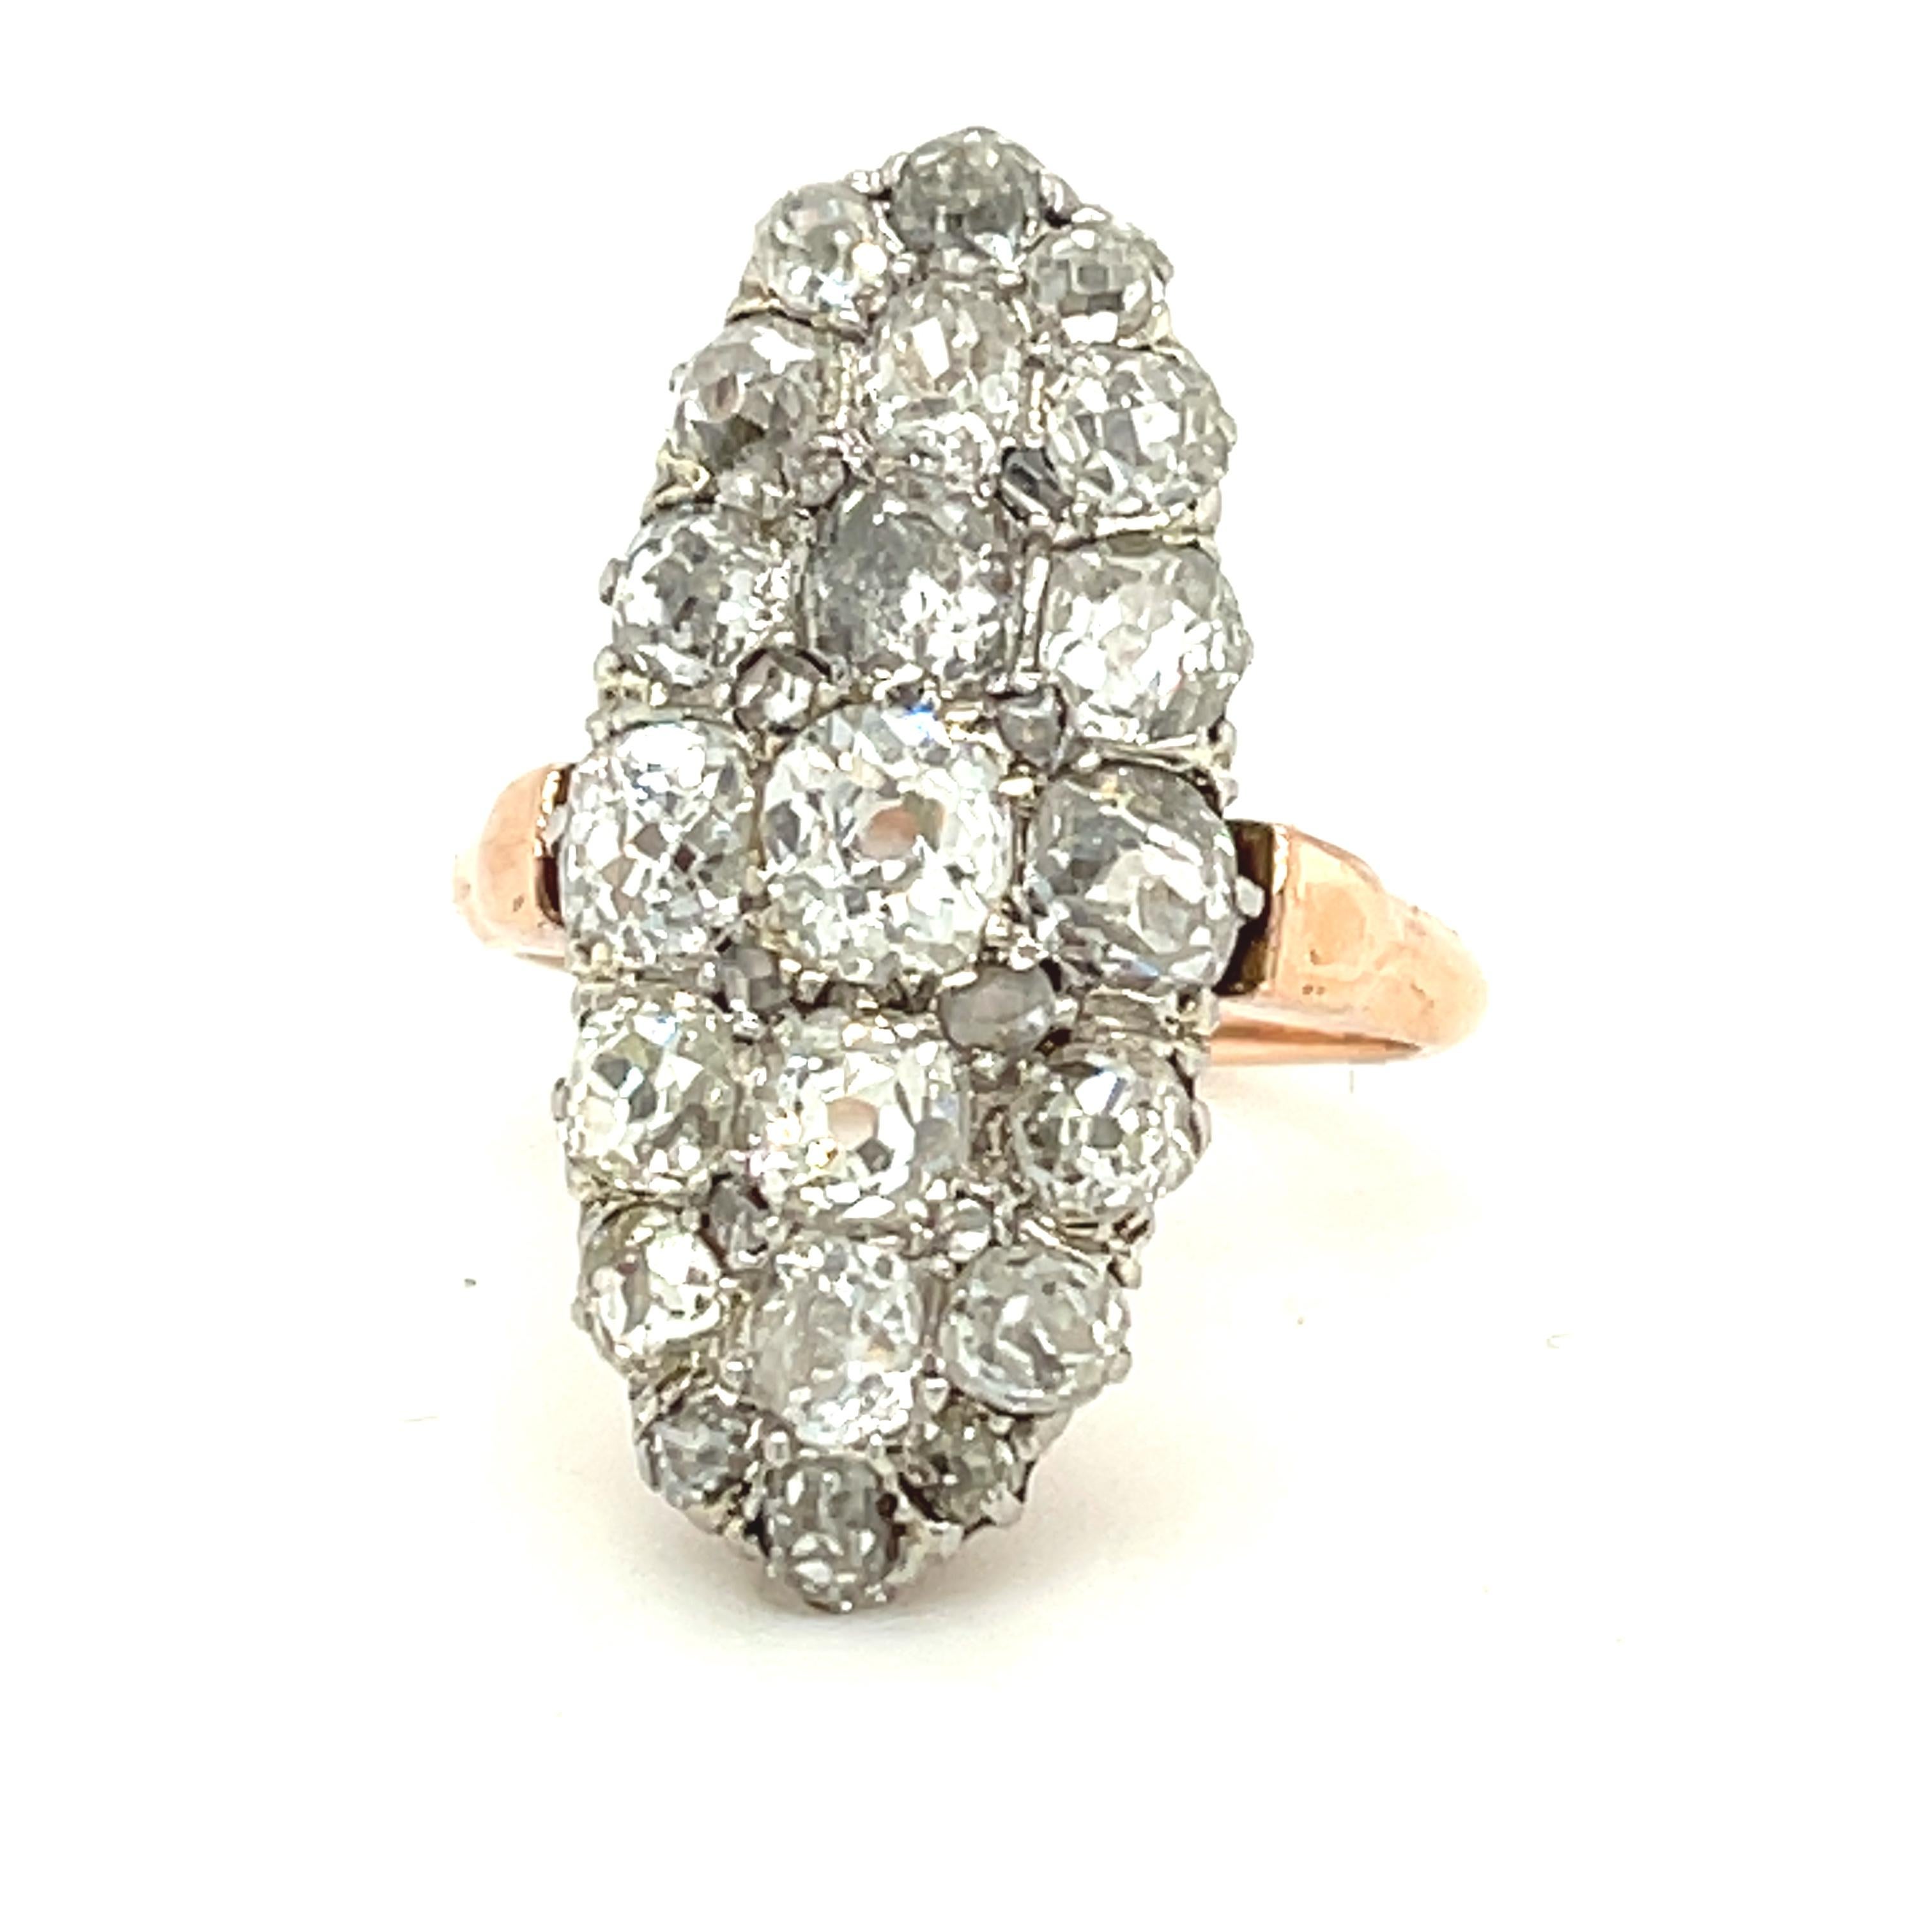 A charming antique old cut diamond navette shaped cluster ring circa 1880. The ring has an owl French export mark. The ring is made in rose colored 18k gold. The chunky antique cut diamonds weigh about 2.00 carats. They are mostly I to J color and